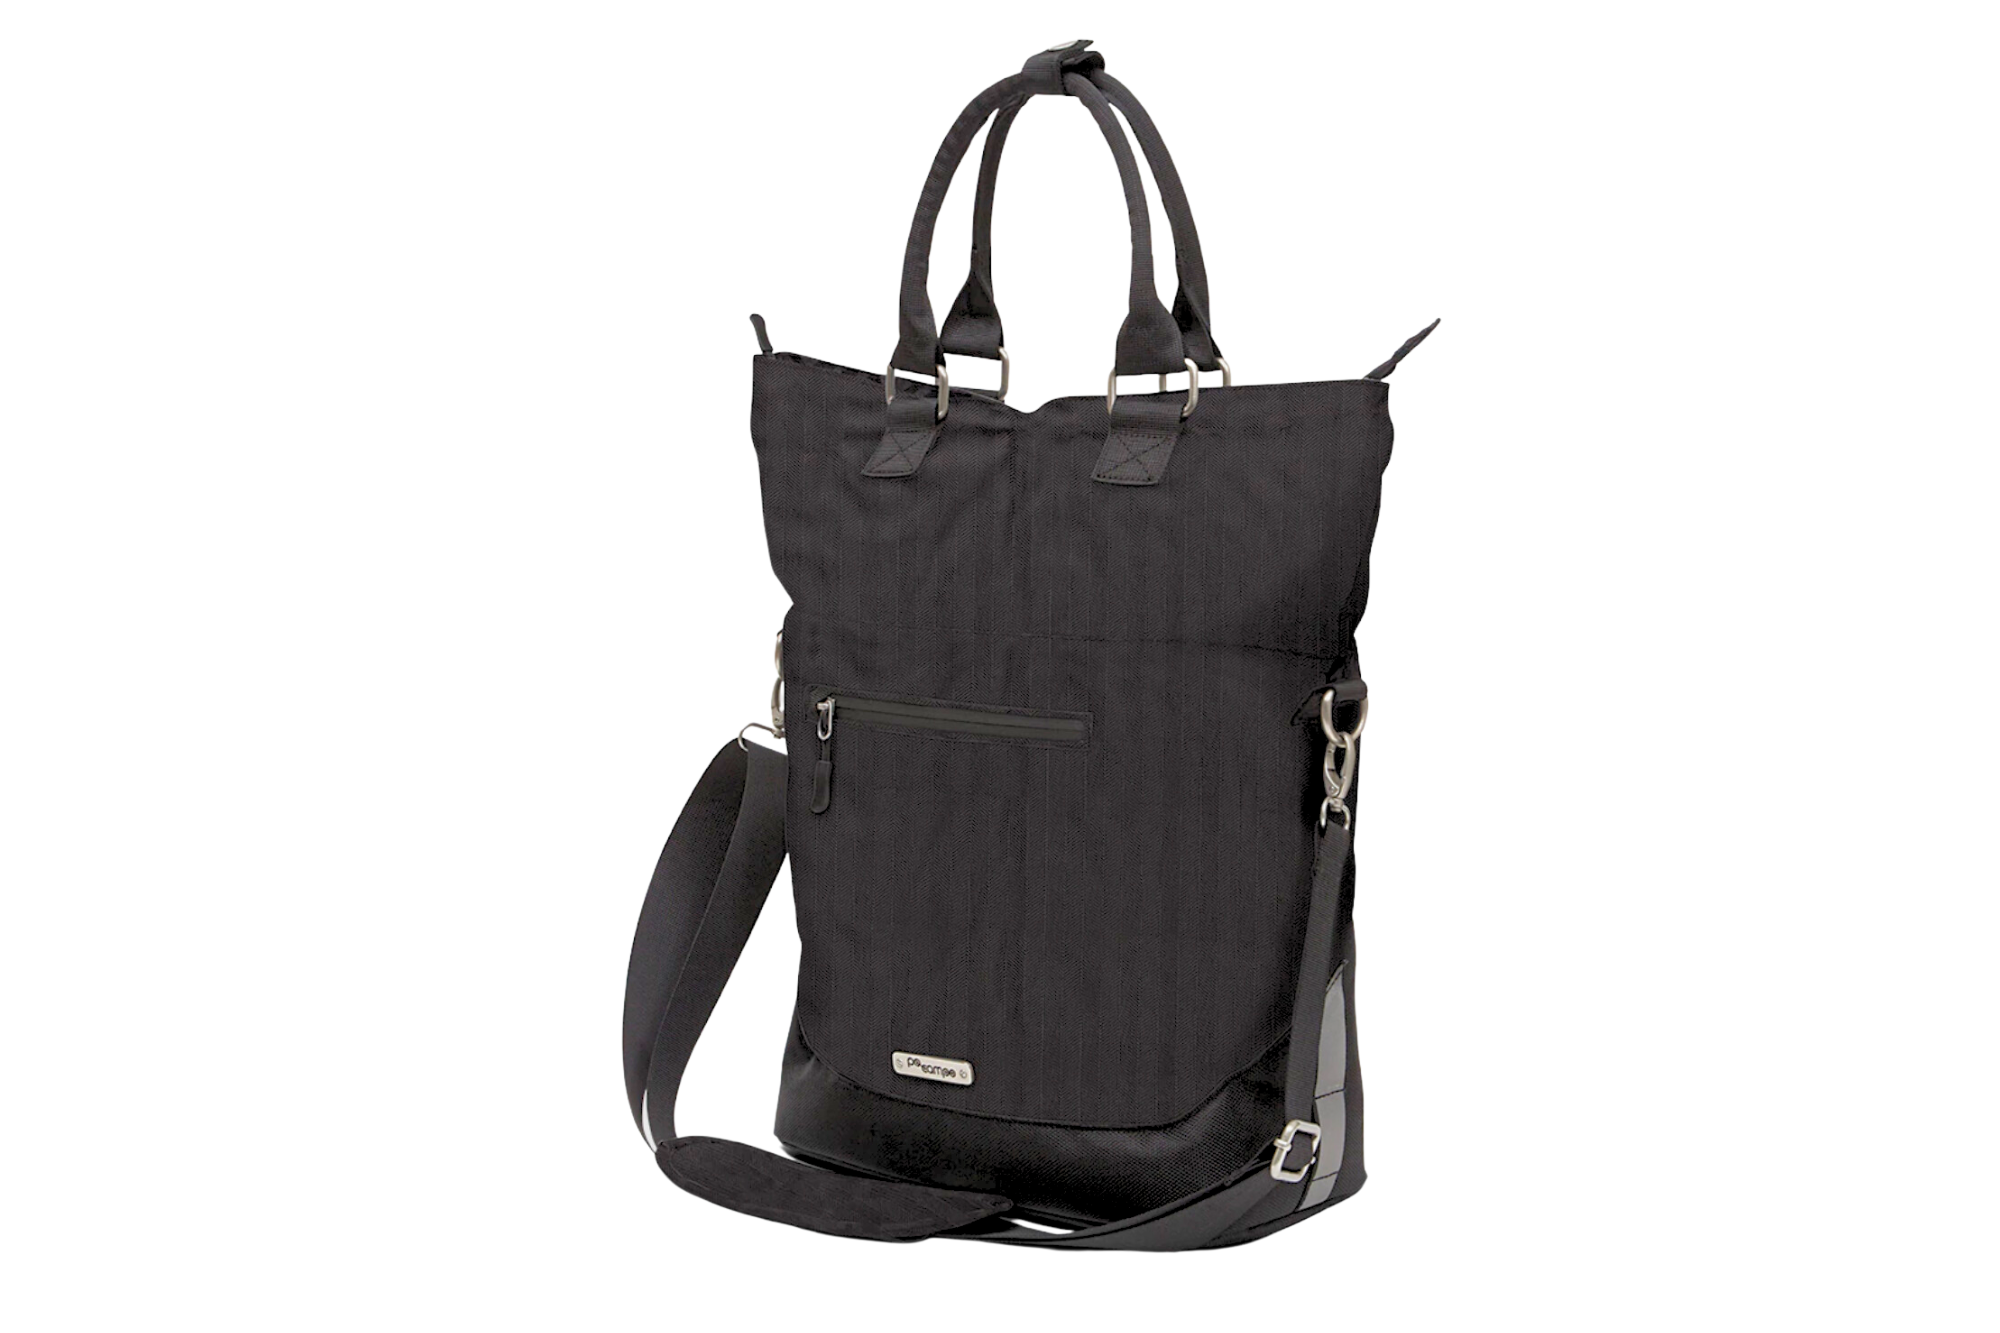 The Best Commuter Pannier: The waterproof Bergen pannier is everything you need for your daily commute!  Combine the best of style and function in one bag that transitions to a cross body bag.